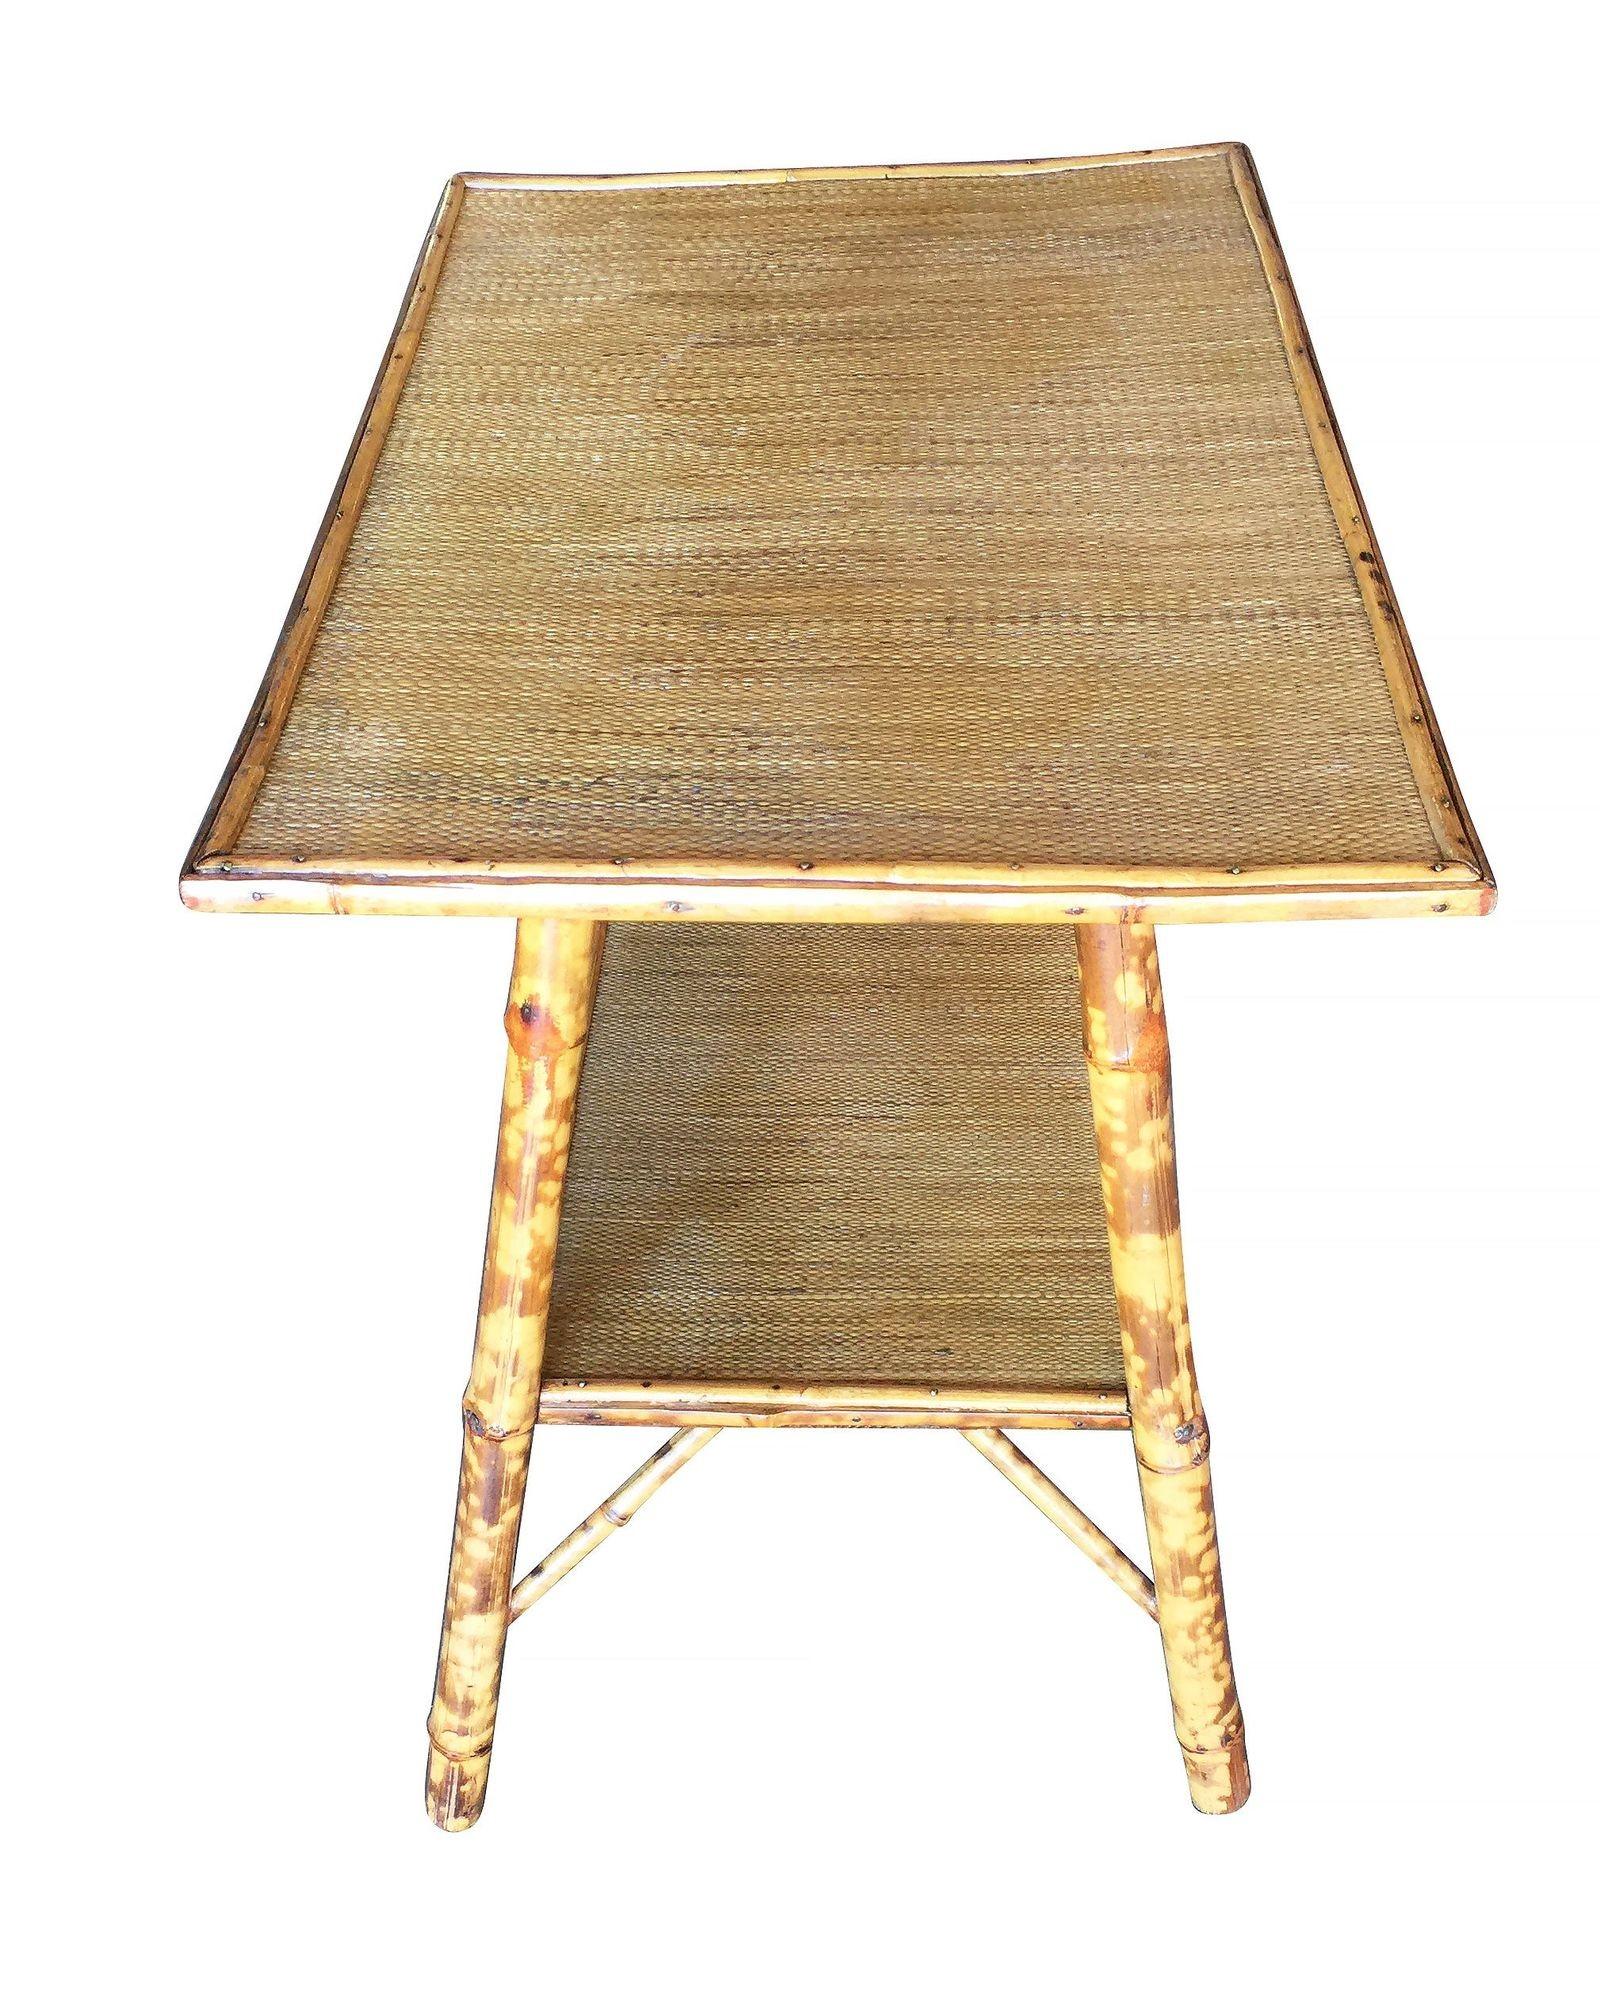 Antique Ascetically Movement tiger bamboo pedestal side table with rice mat top and secondary bottom shelf.

Restored to new for you.

All rattan, bamboo and wicker furniture has been painstakingly refurbished to the highest standards with the best